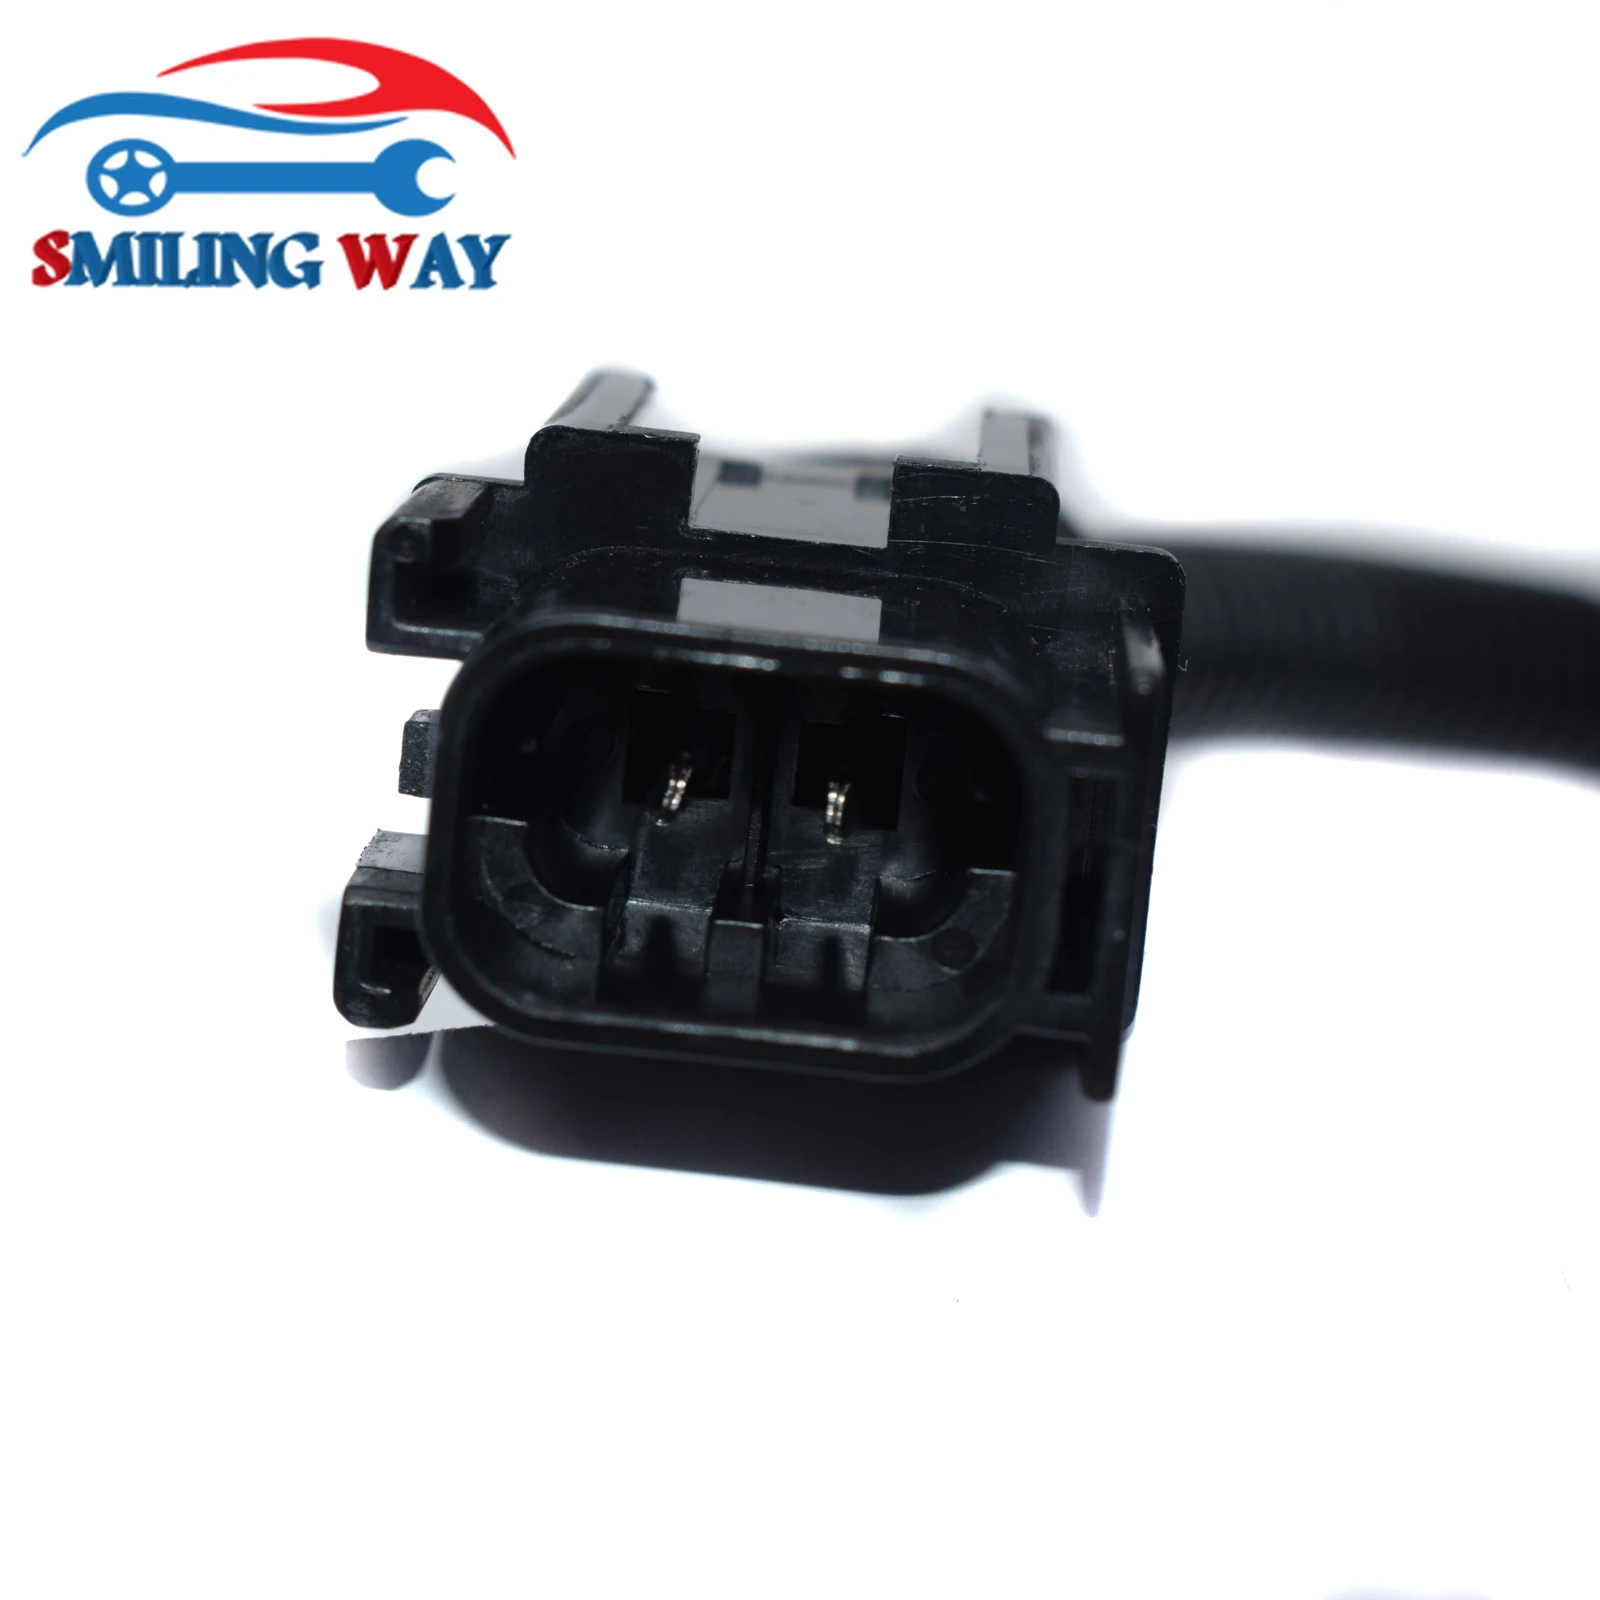 Cylinder Head Temperature Sensor Wiring Harness Connector Plug For Nissan  300ZX 1984 1985 1986 1987 1988 1989 3.0L 24079-01P00 AliExpress